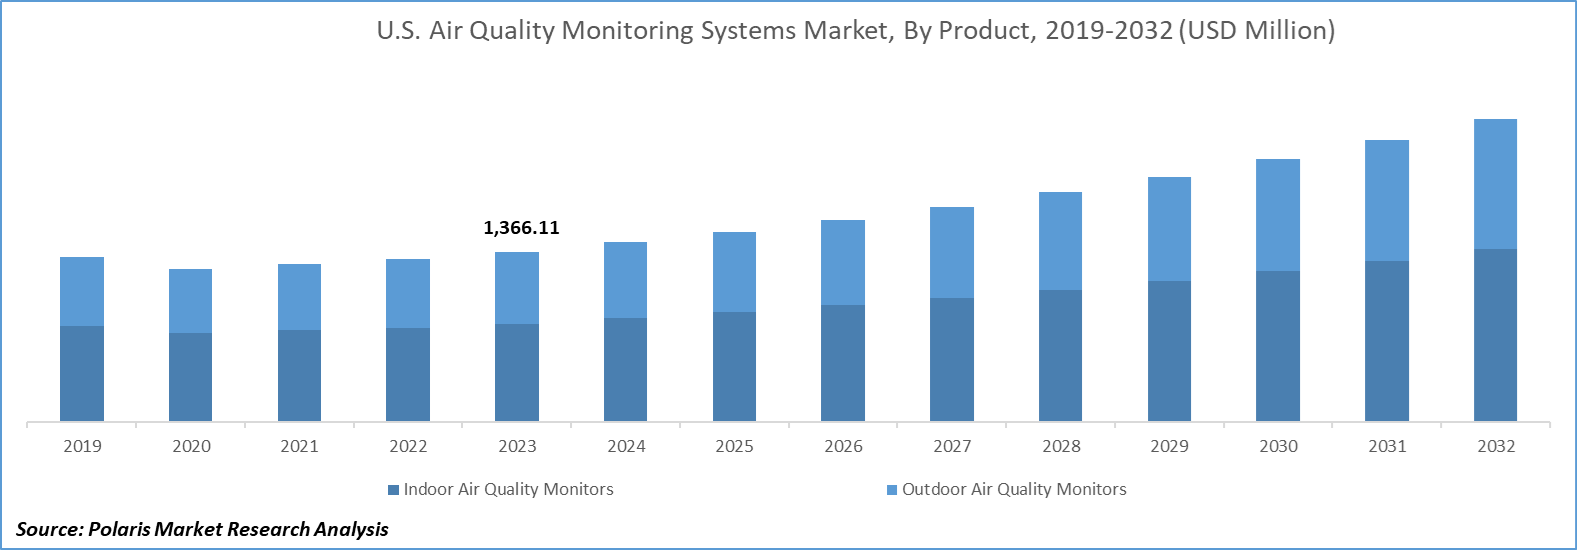 Air Quality Monitoring Systems Market Size